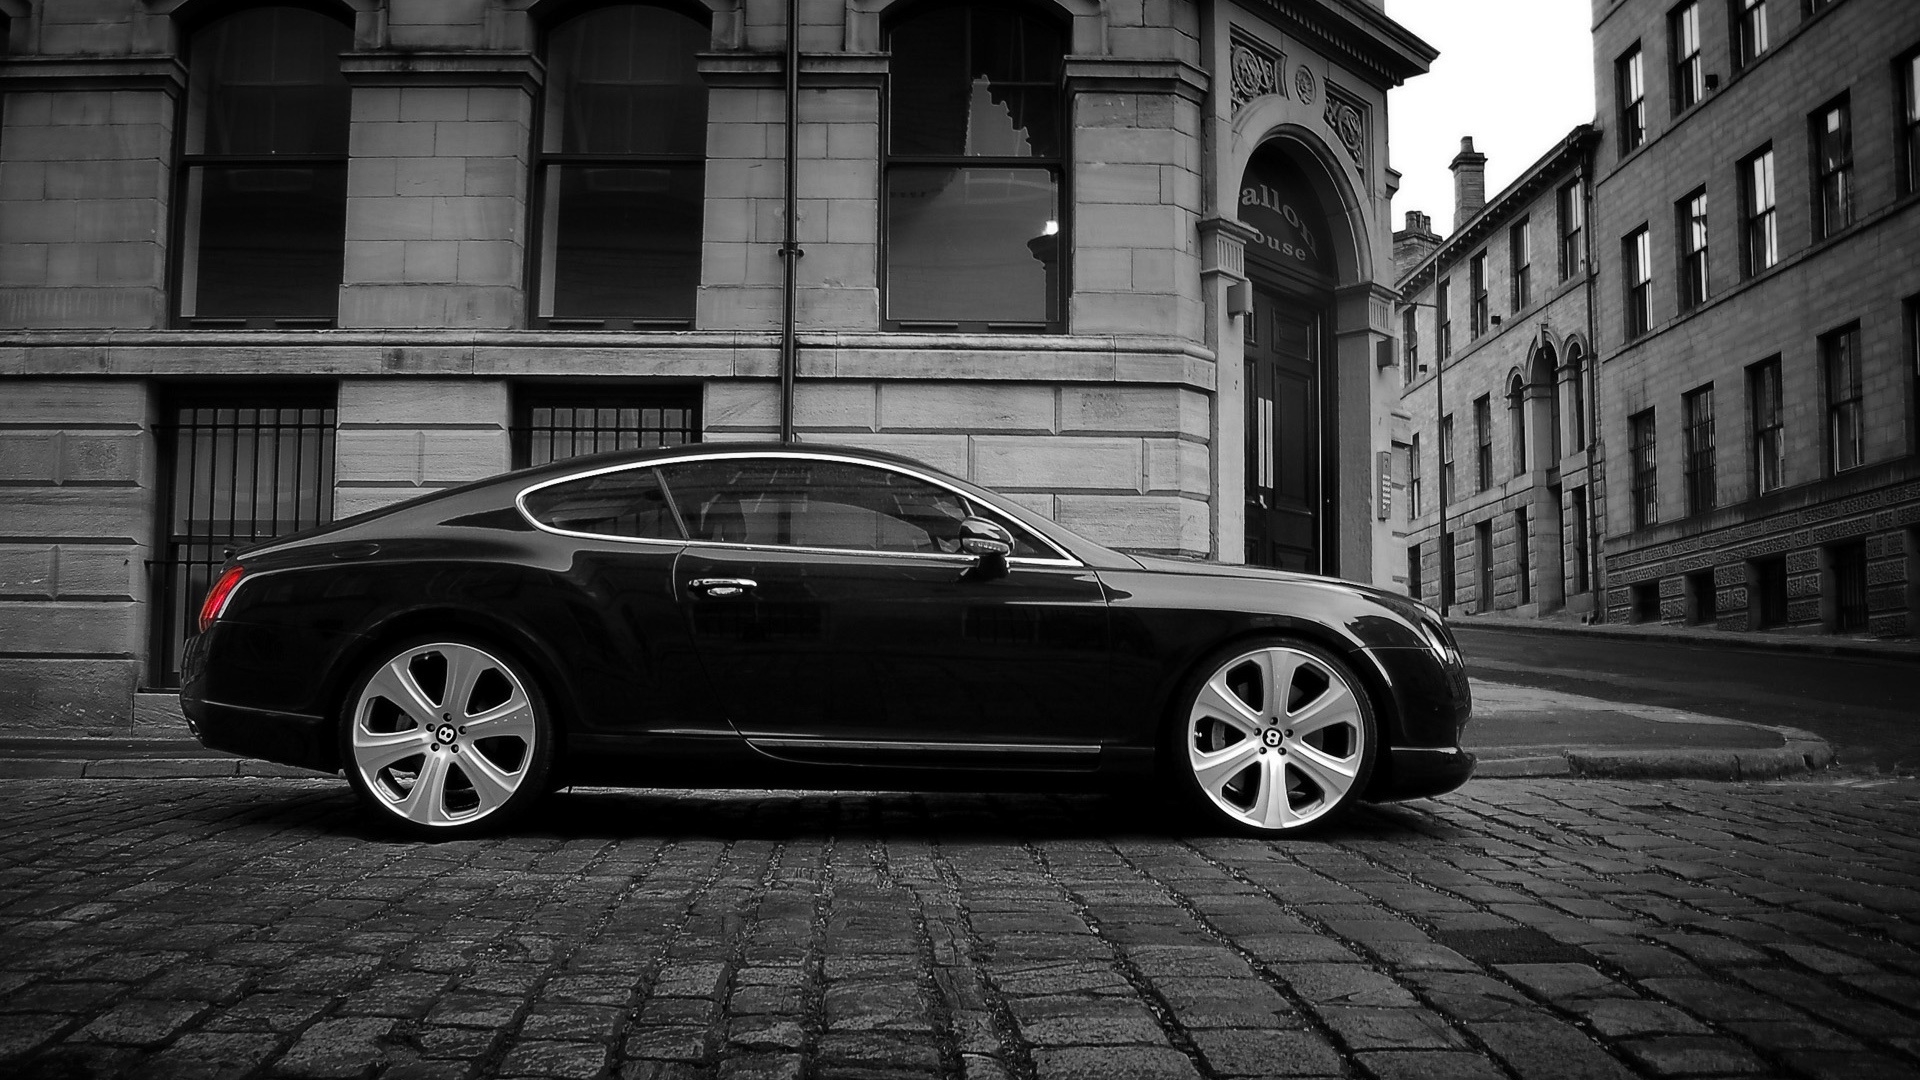 Bentley Continental GT S Project Kahn 2008 Side for 1920 x 1080 HDTV 1080p resolution